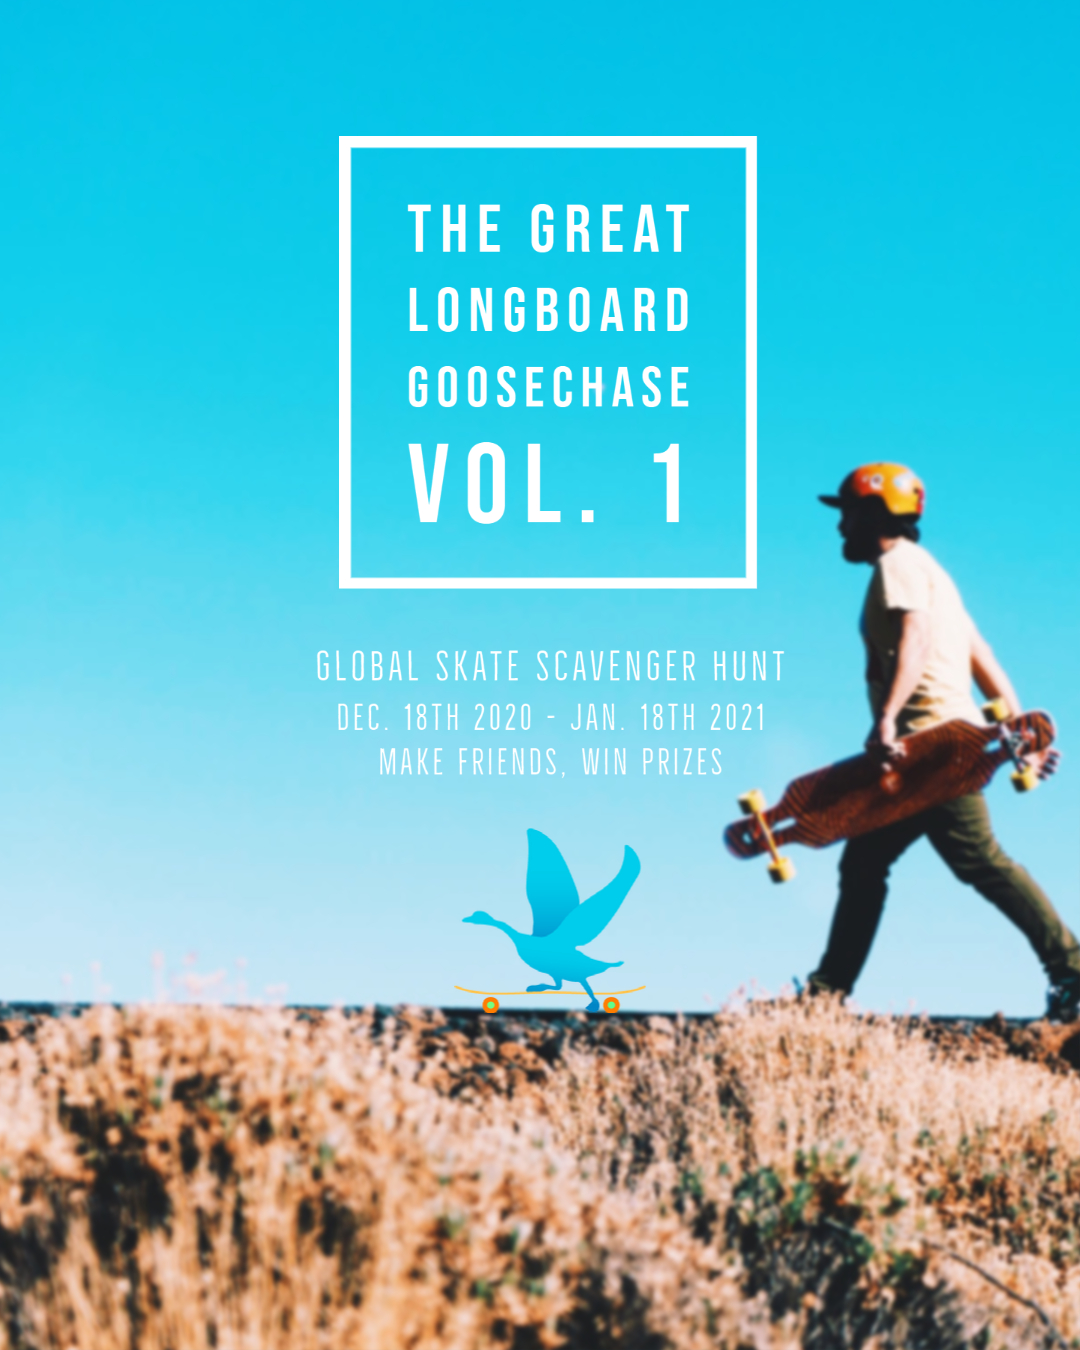 The Great Longboard GooseChase, Vol. 1